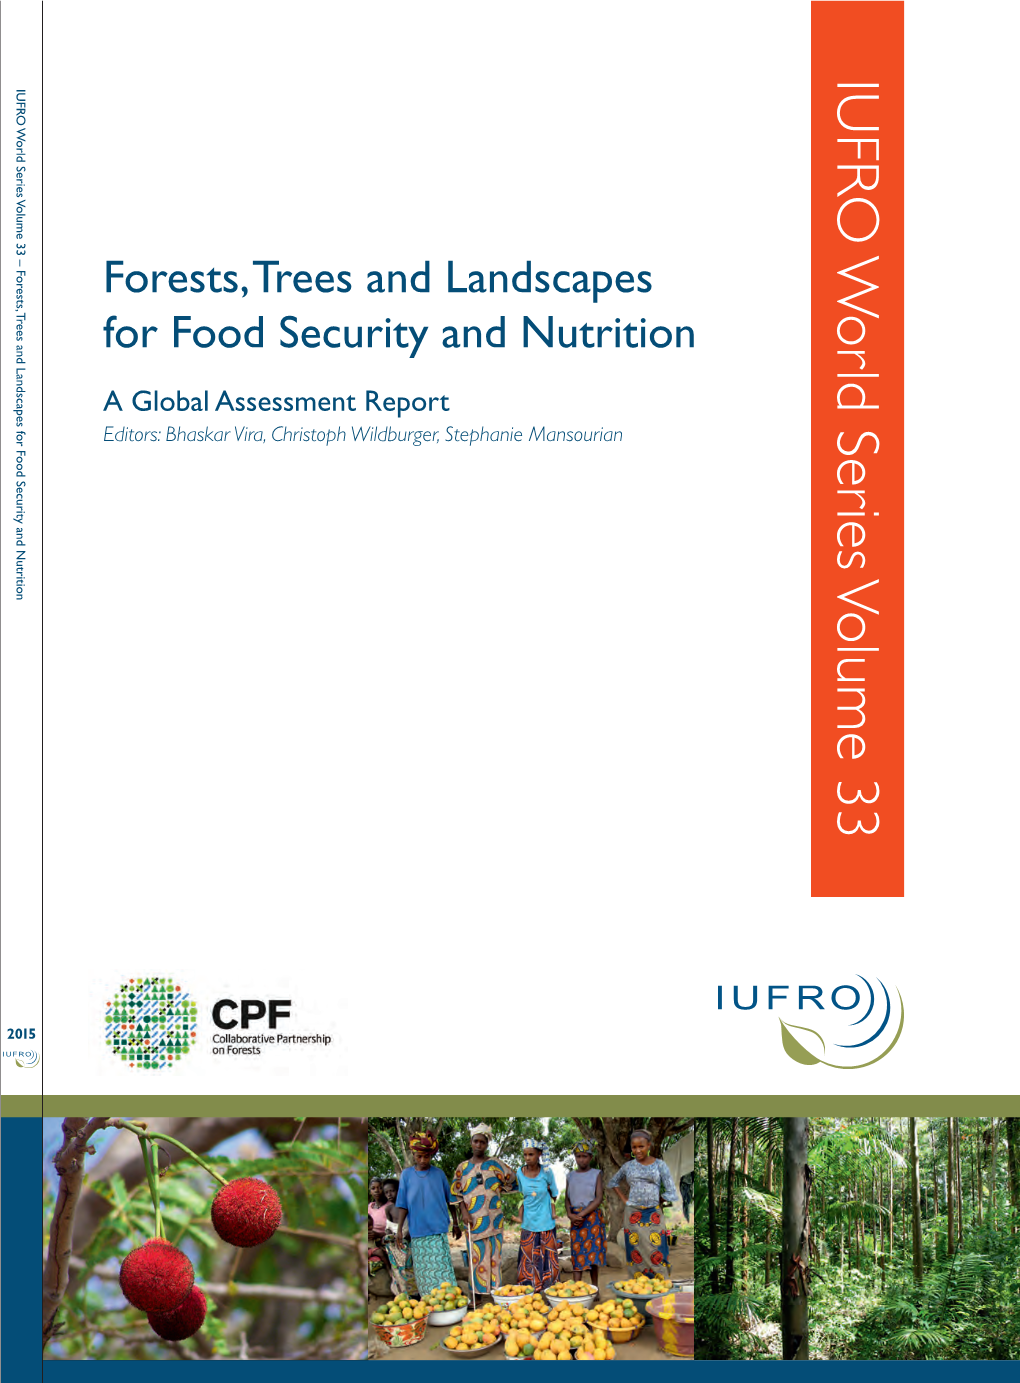 Forests, Trees and Landscapes for Food Security and Nutrition